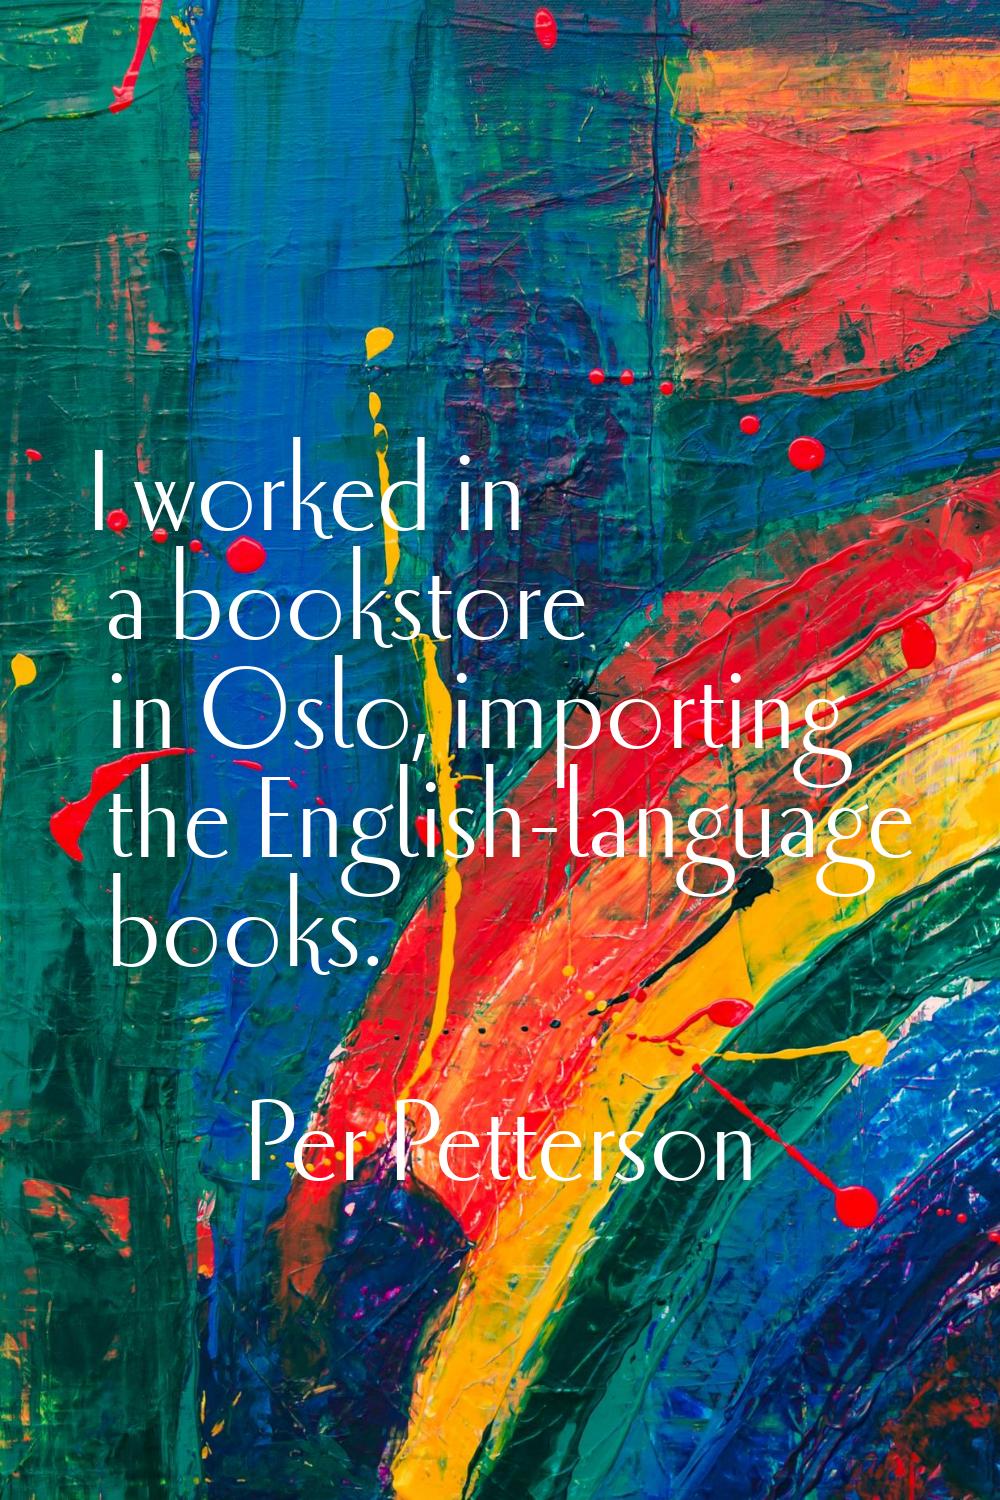 I worked in a bookstore in Oslo, importing the English-language books.